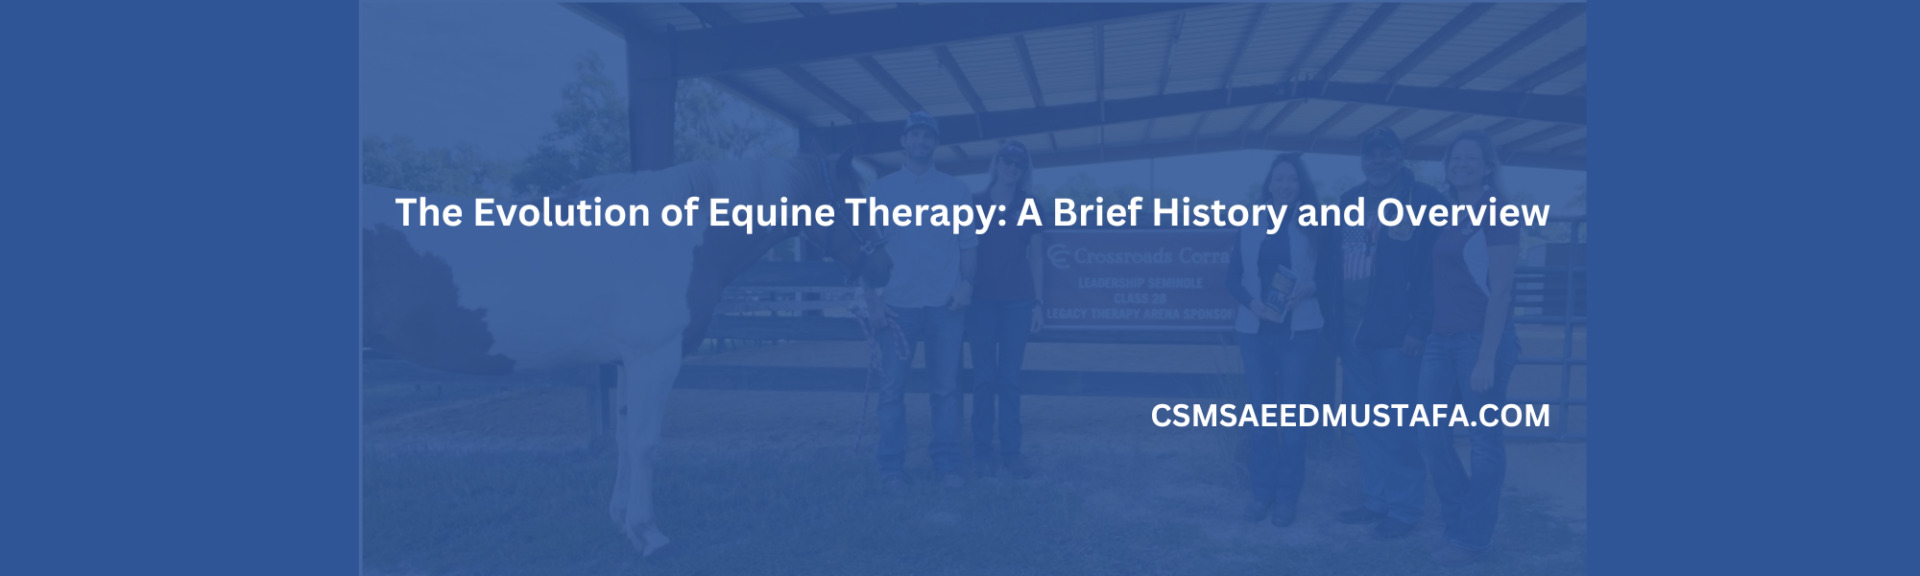 The Evolution of Equine Therapy